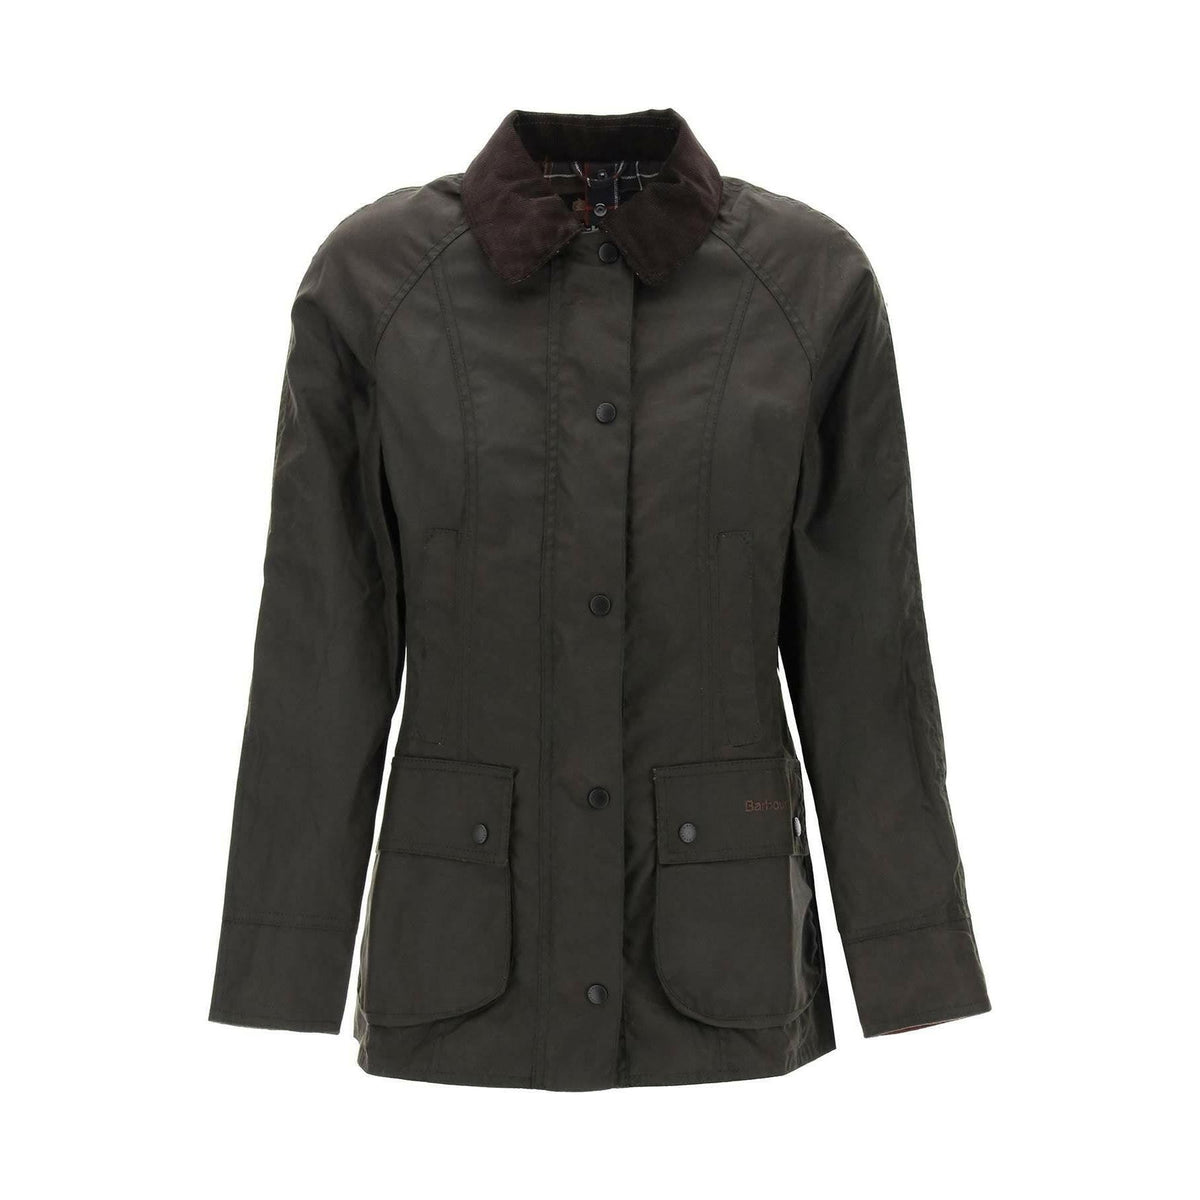 Olive Beadnell Wax Cotton Casual Jacket BARBOUR JOHN JULIA.